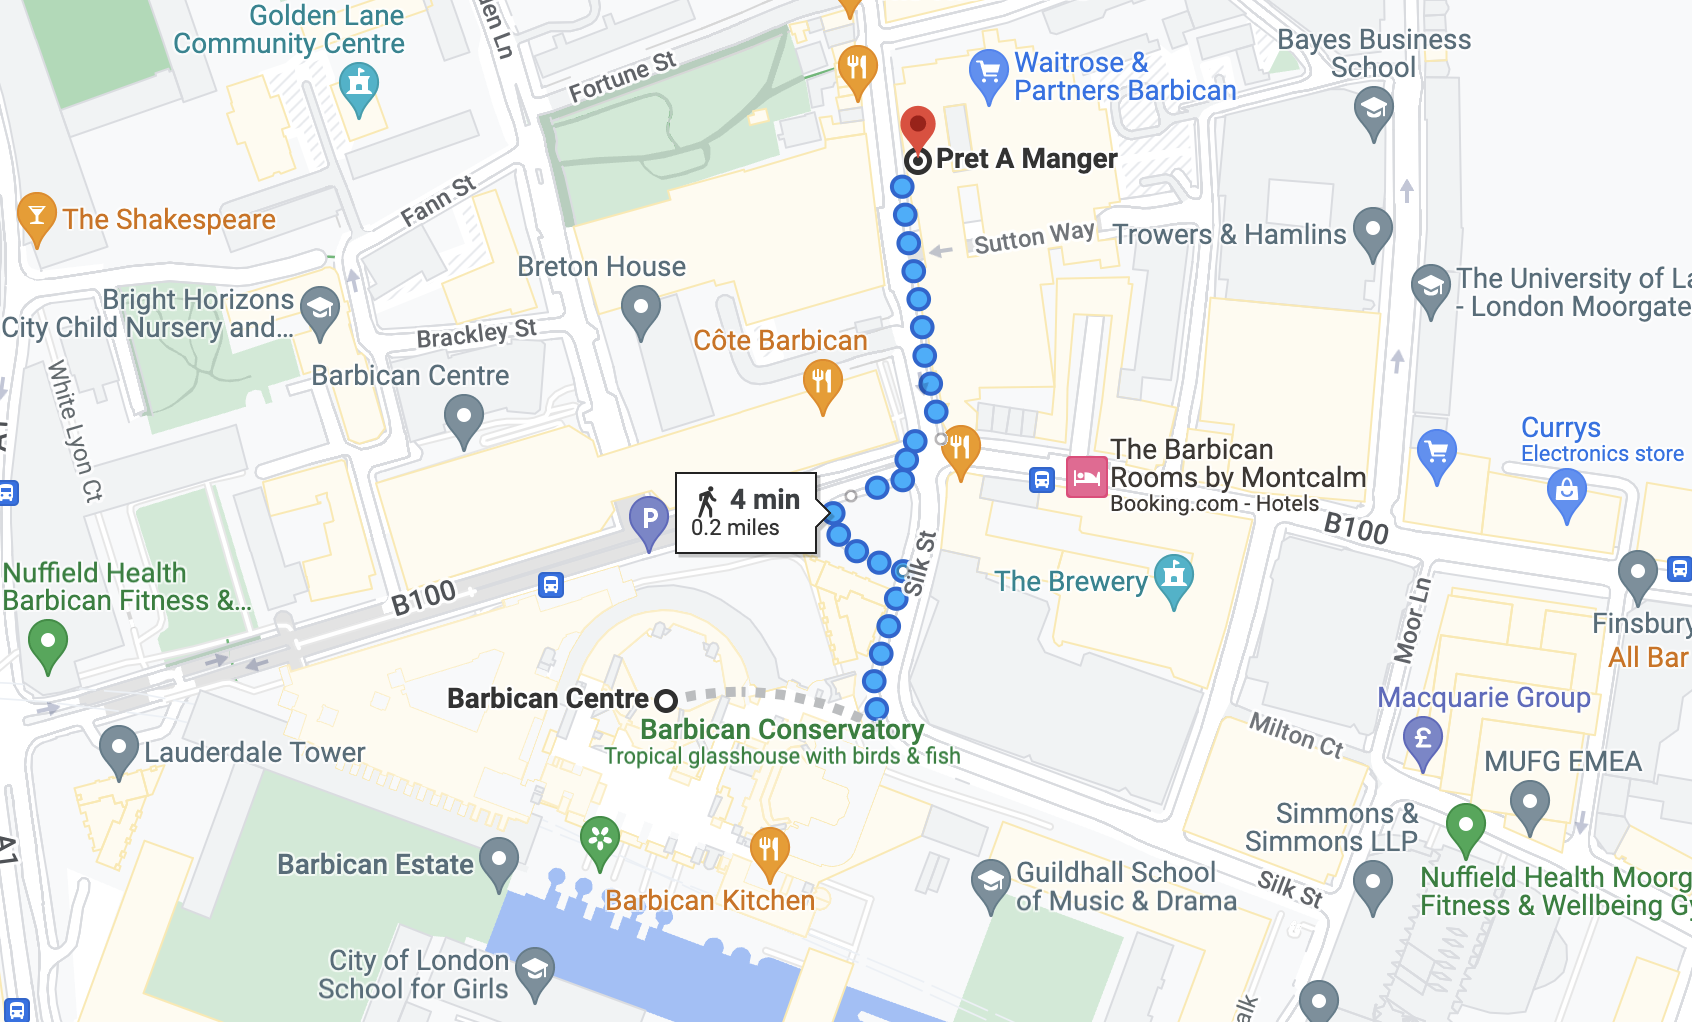 Google maps directions from Barbican Centre to Pret A Manger